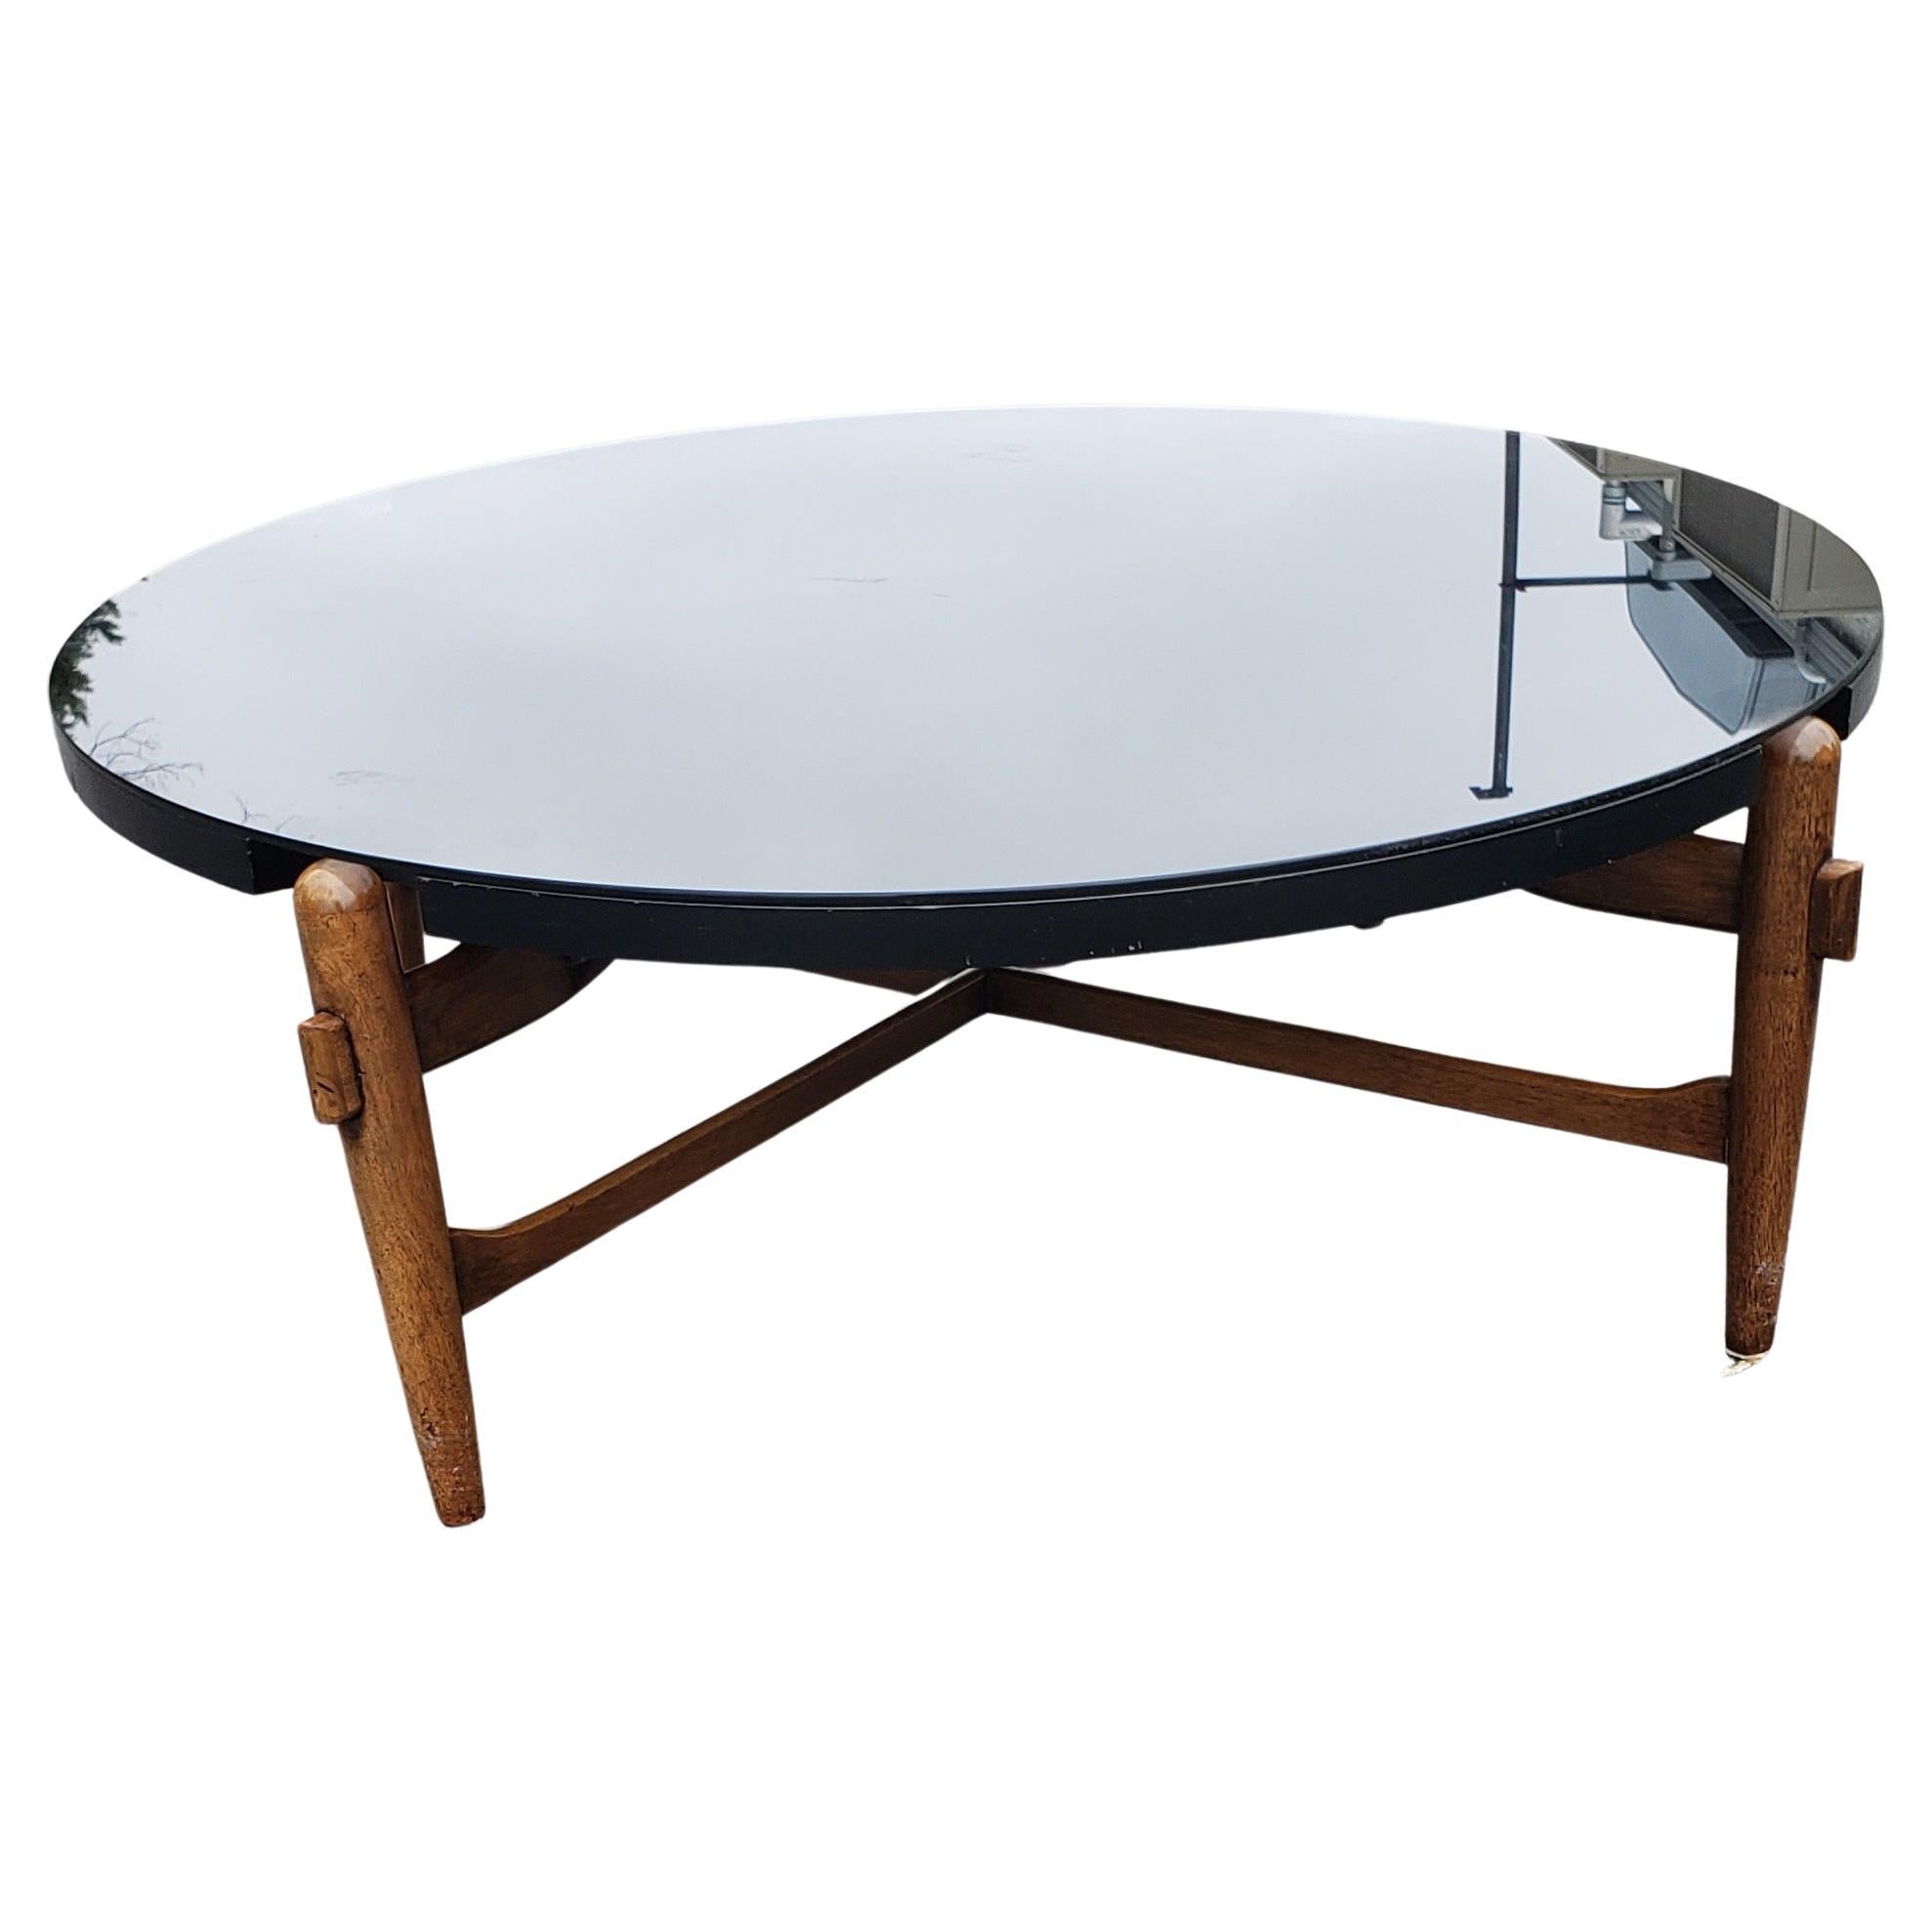 A 1950s Greta Grossman designed Danish modern coffee table featuring a round black laminate top with notches to allow for the four leg posts, sculptural wood frame with cross-stretchers, original finish. Protective smoked glass top in very good